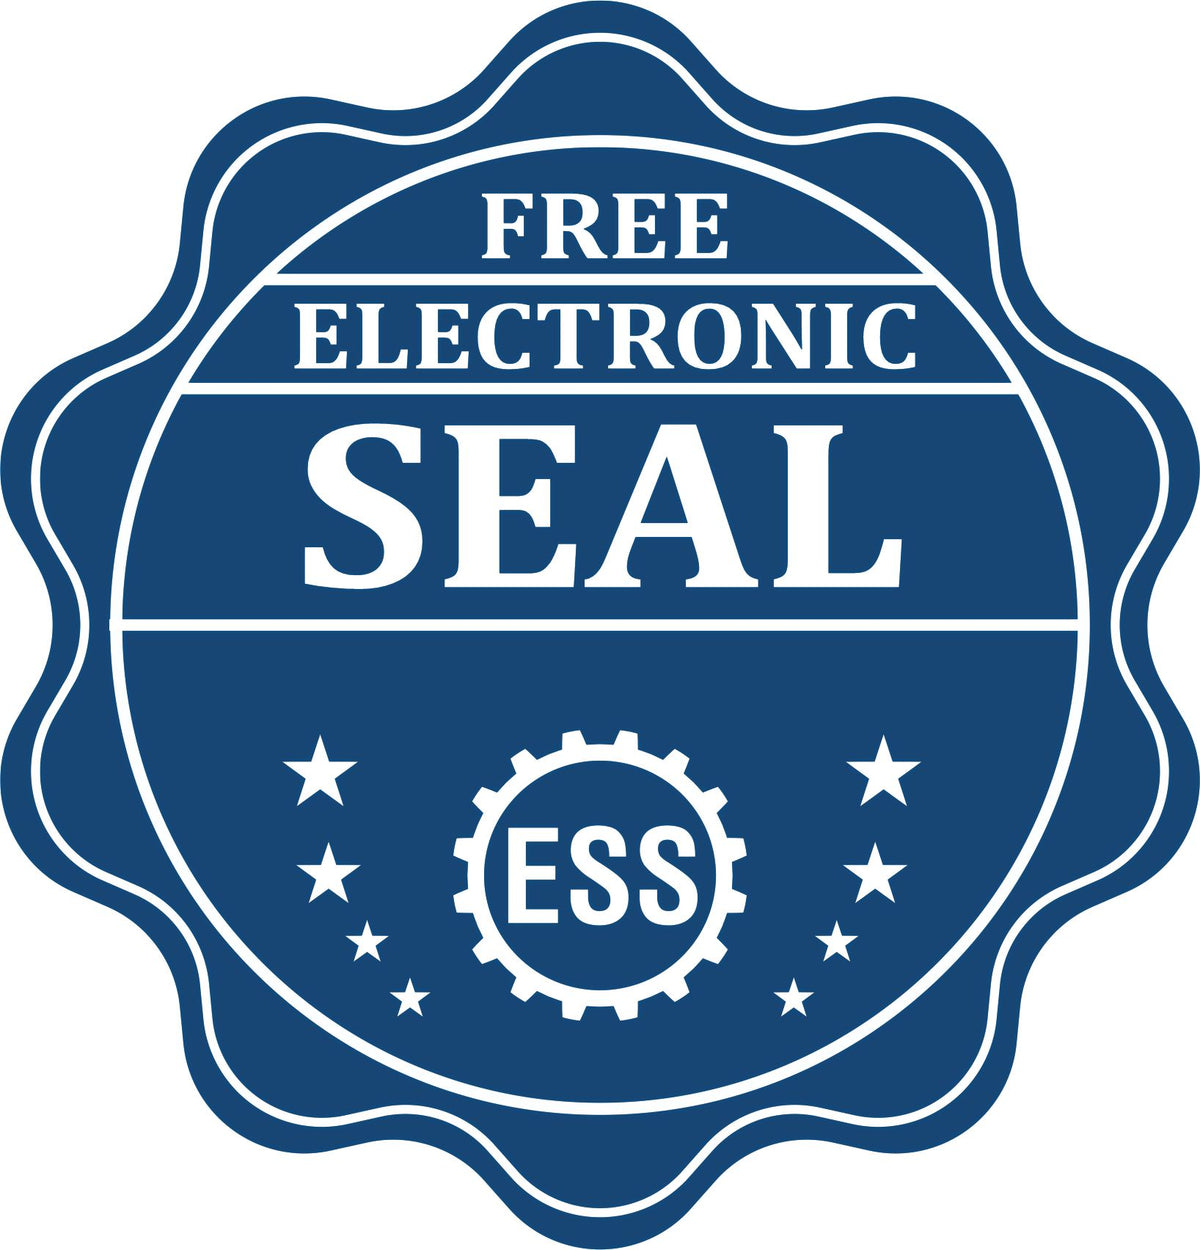 A badge showing a free electronic seal for the New York Professional Engineer Seal Stamp with stars and the ESS gear on the emblem.